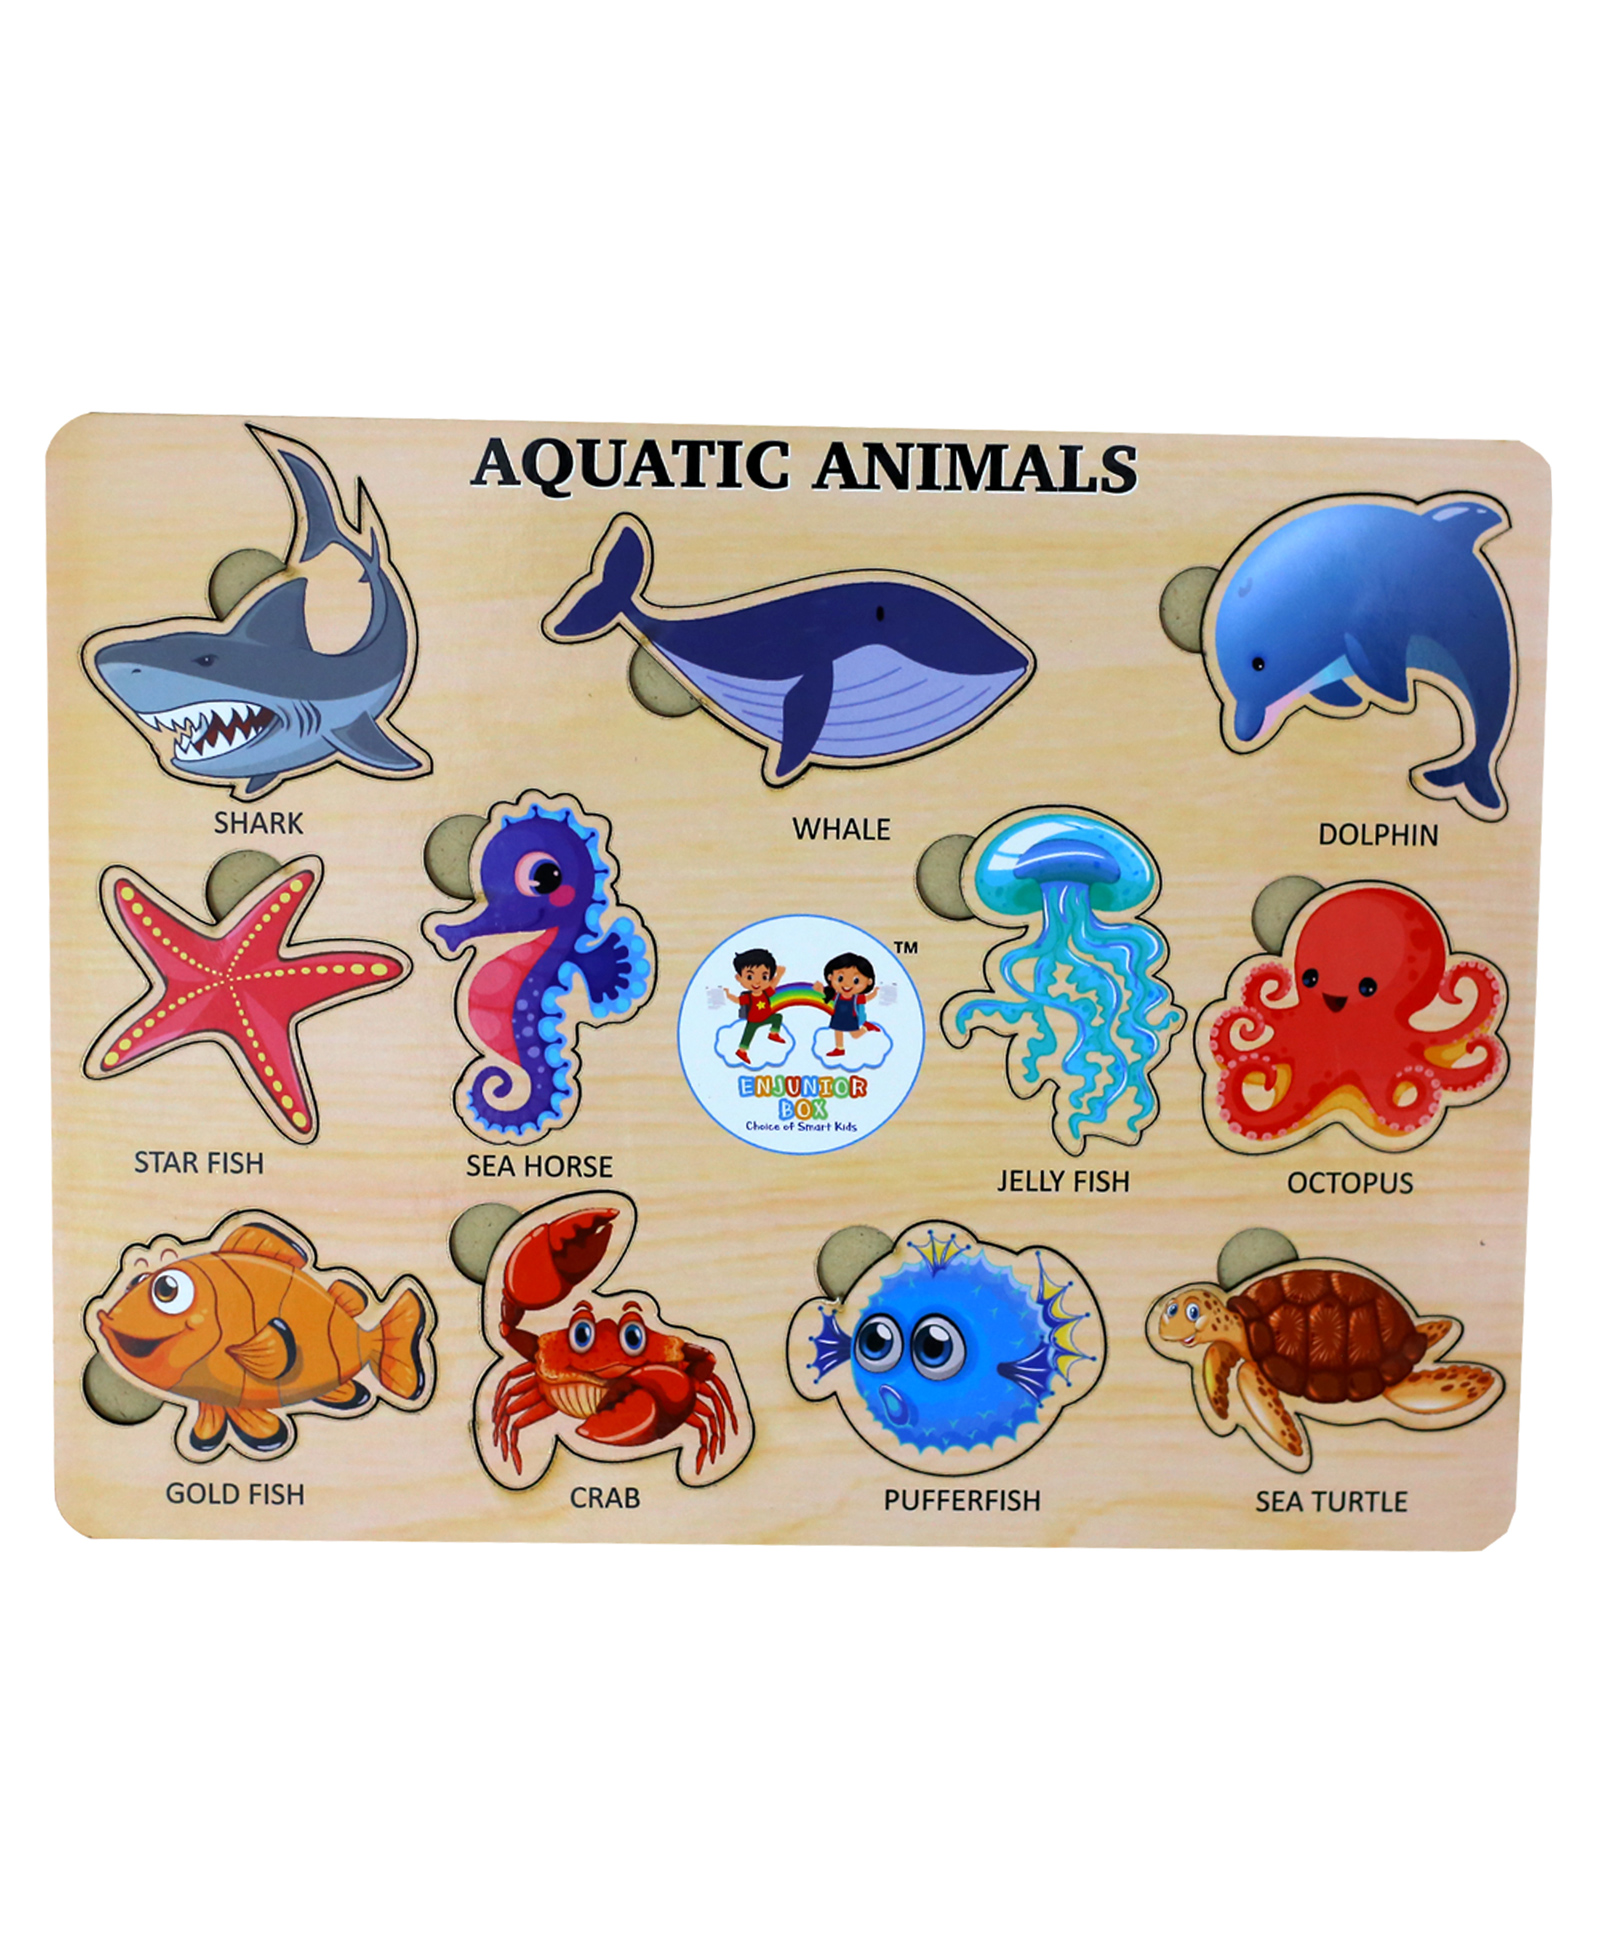 ENJUNIOR BOX - Wooden Aquatic Animals Puzzle without Knobs Educational and  Learning Toy for Kids Online India, Buy Puzzle Games & Toys for (3-6 Years)  at  - 11295195